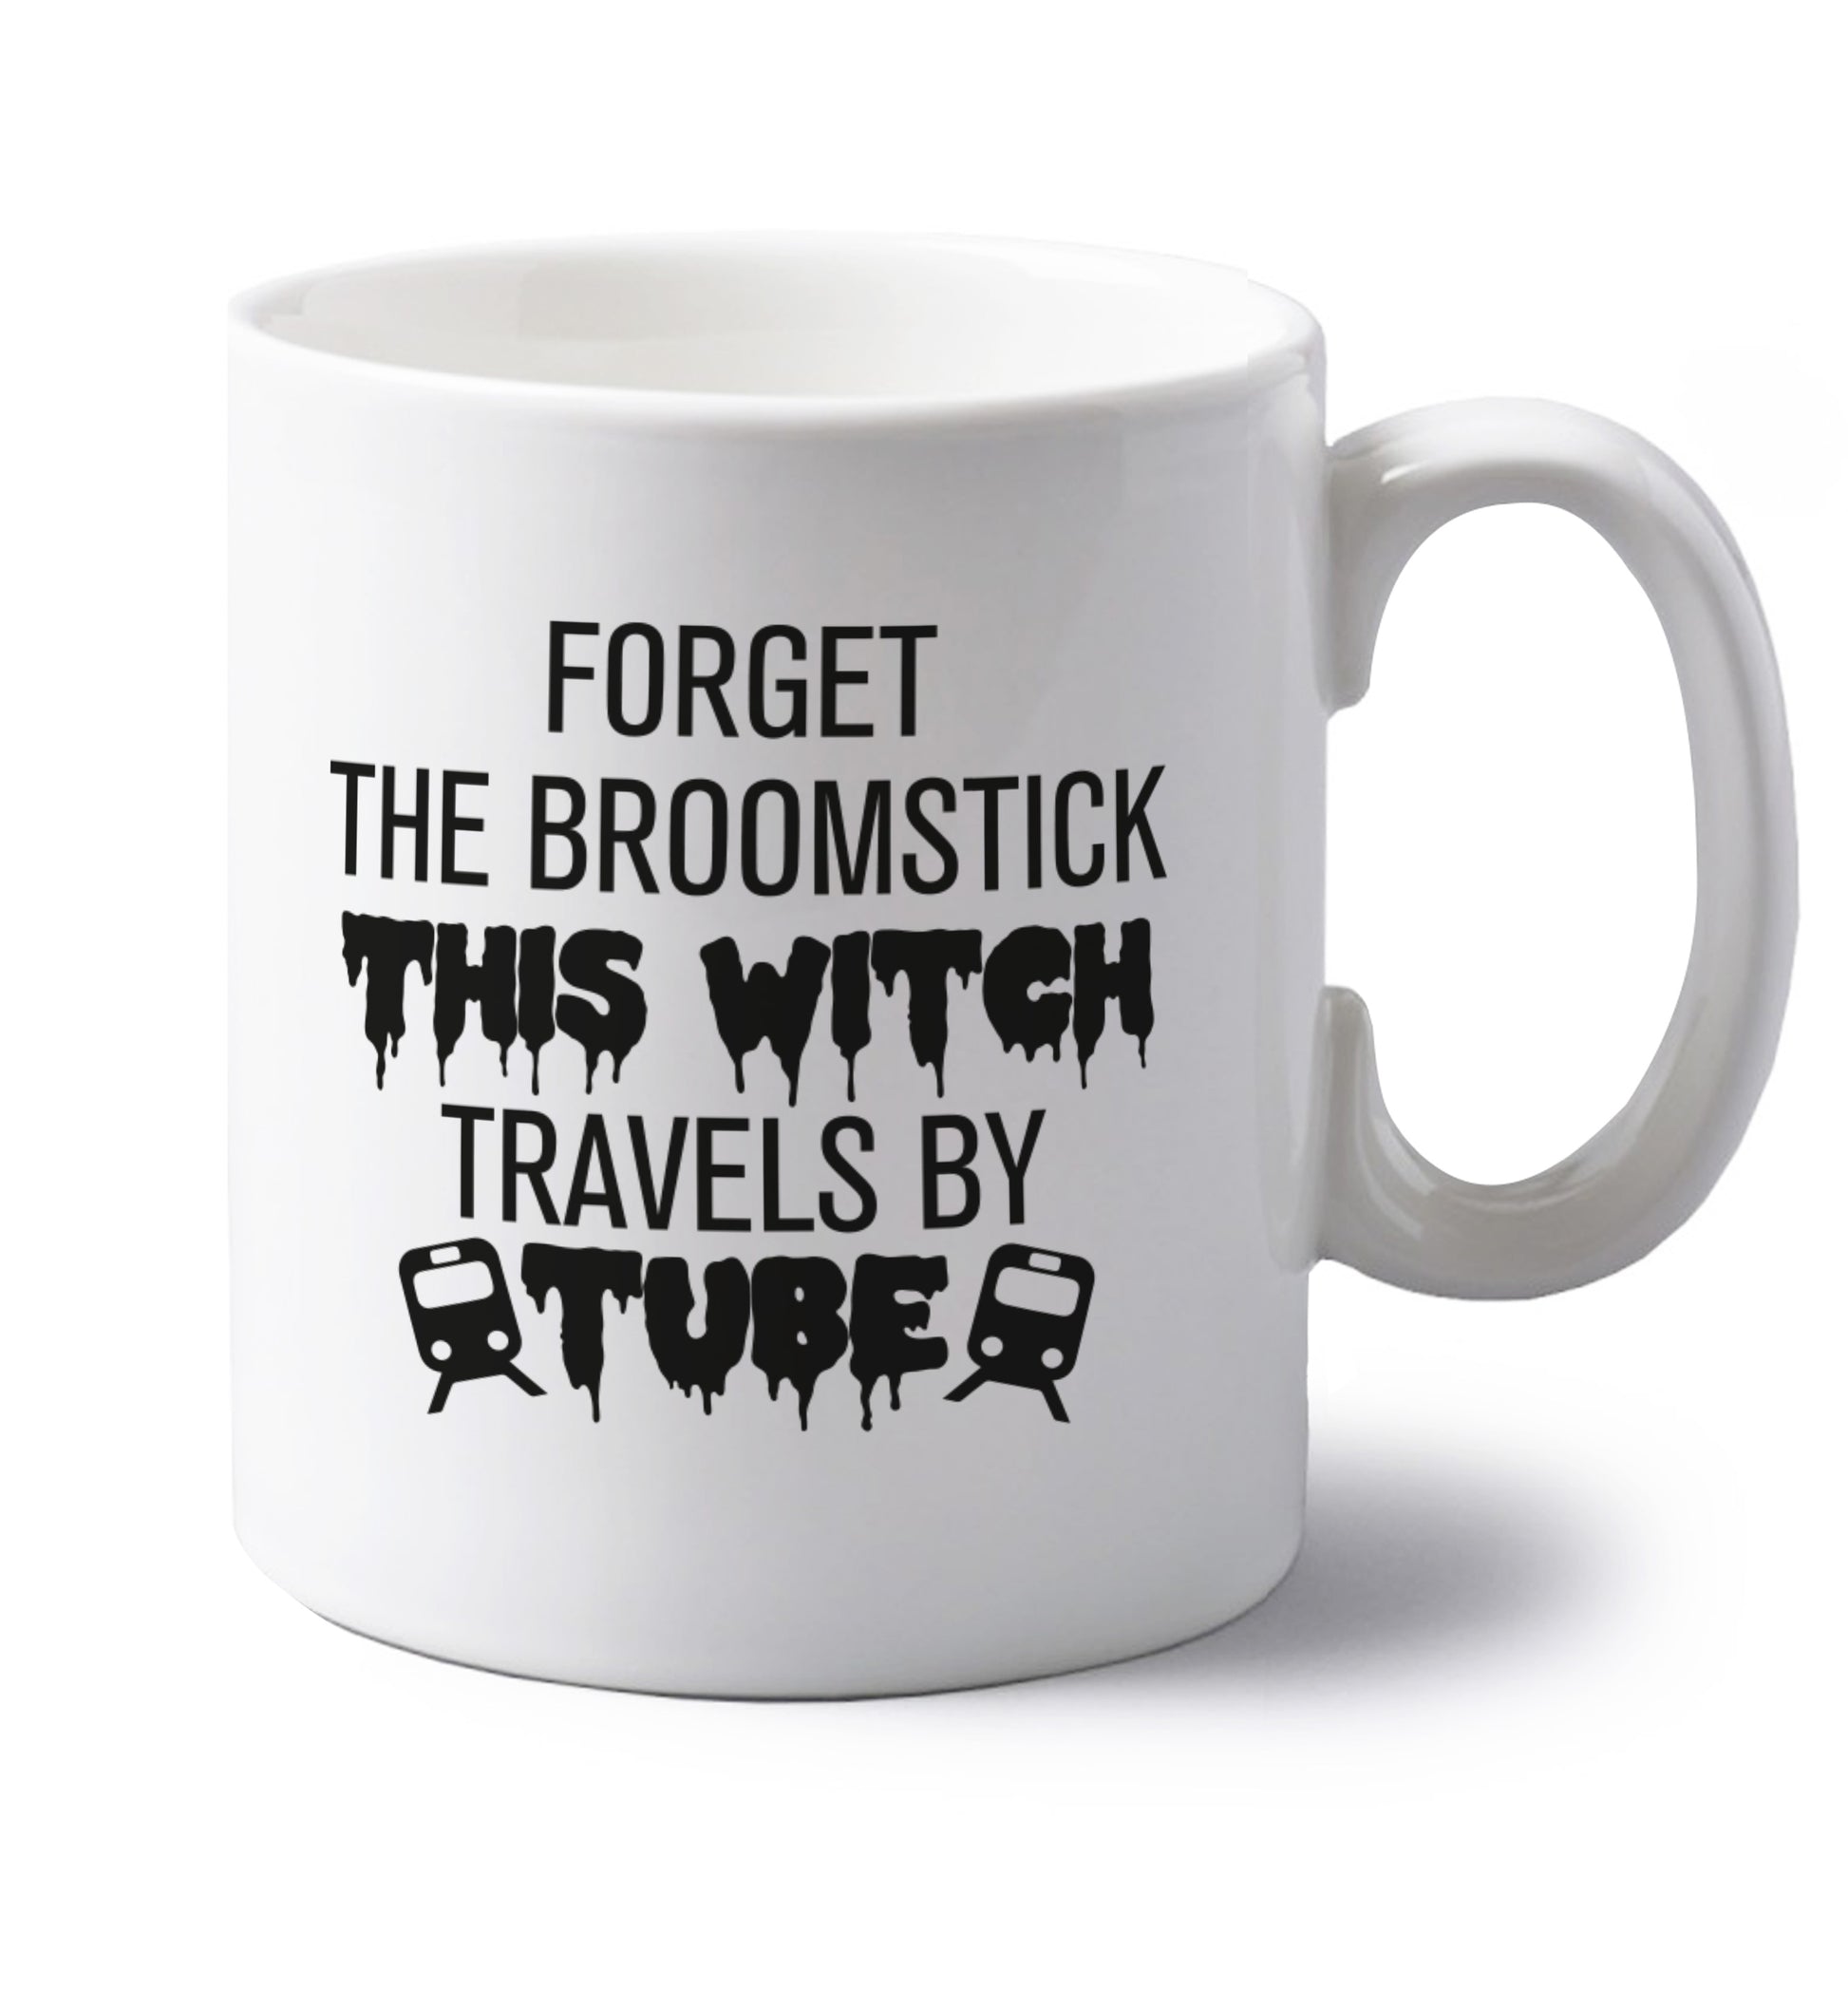 Forget the broomstick this witch travels by tube left handed white ceramic mug 